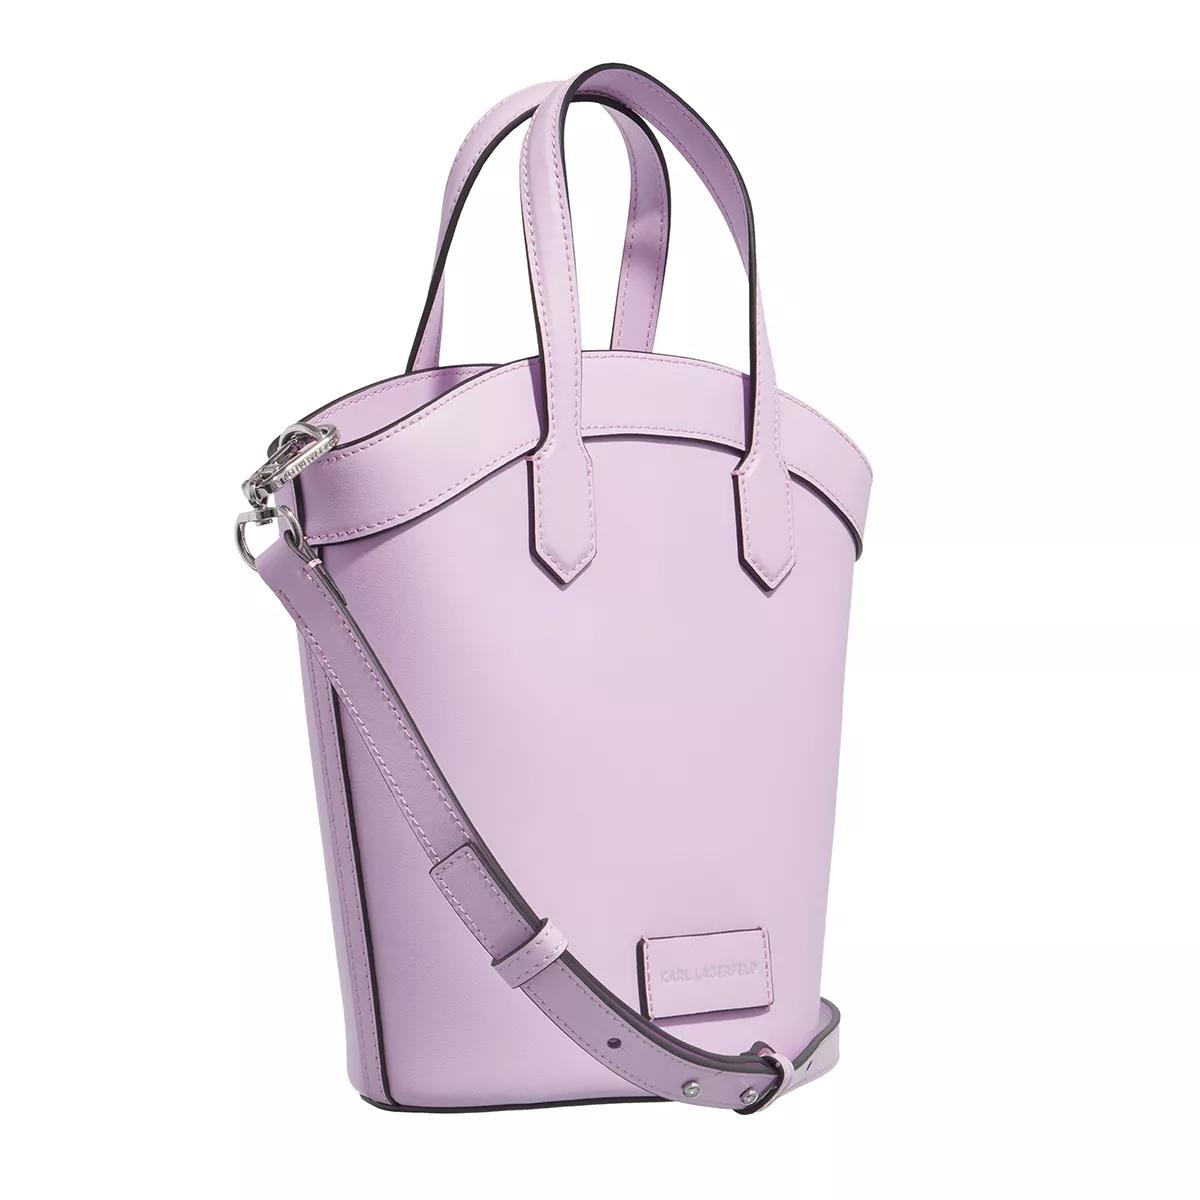 Karl Lagerfeld Totes K Signature Tulip Sm Tote in paars